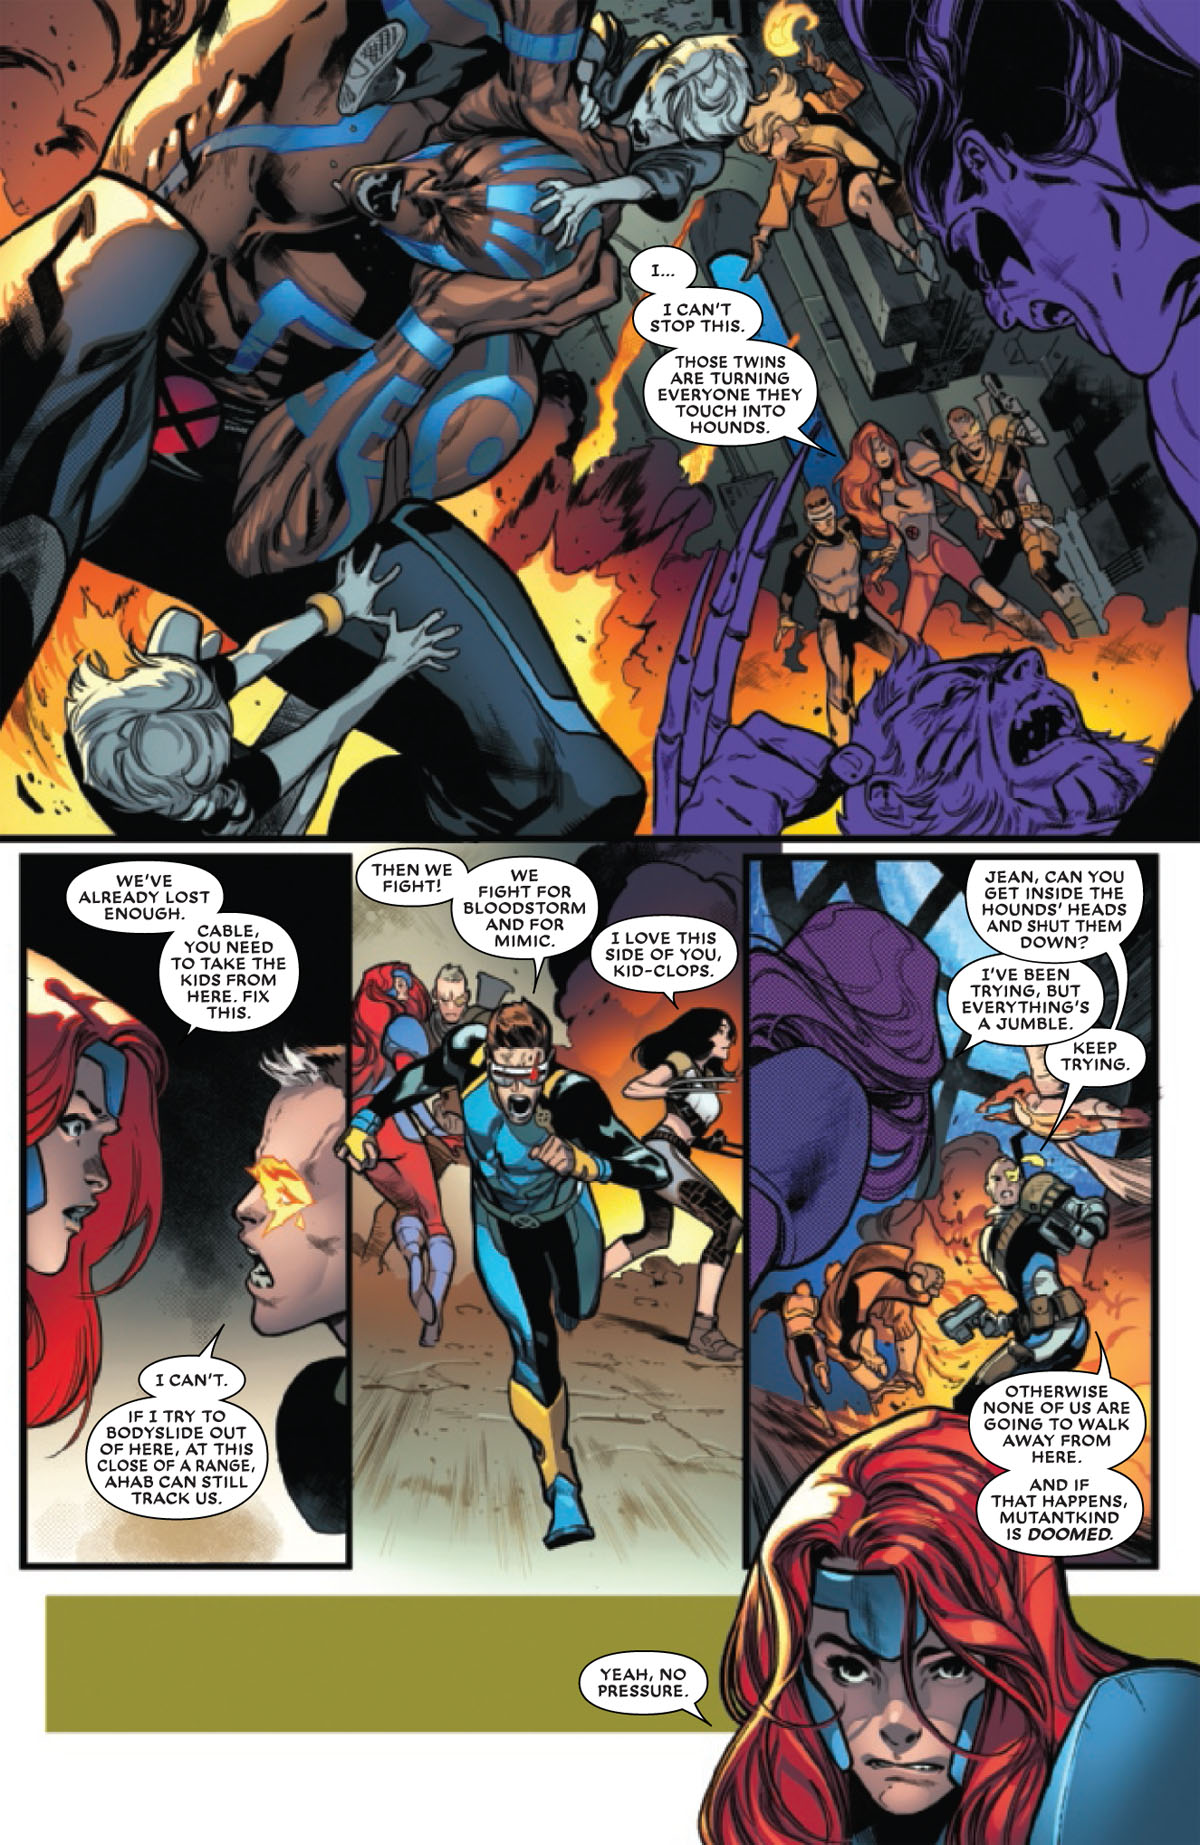 Extermination #5 page 3